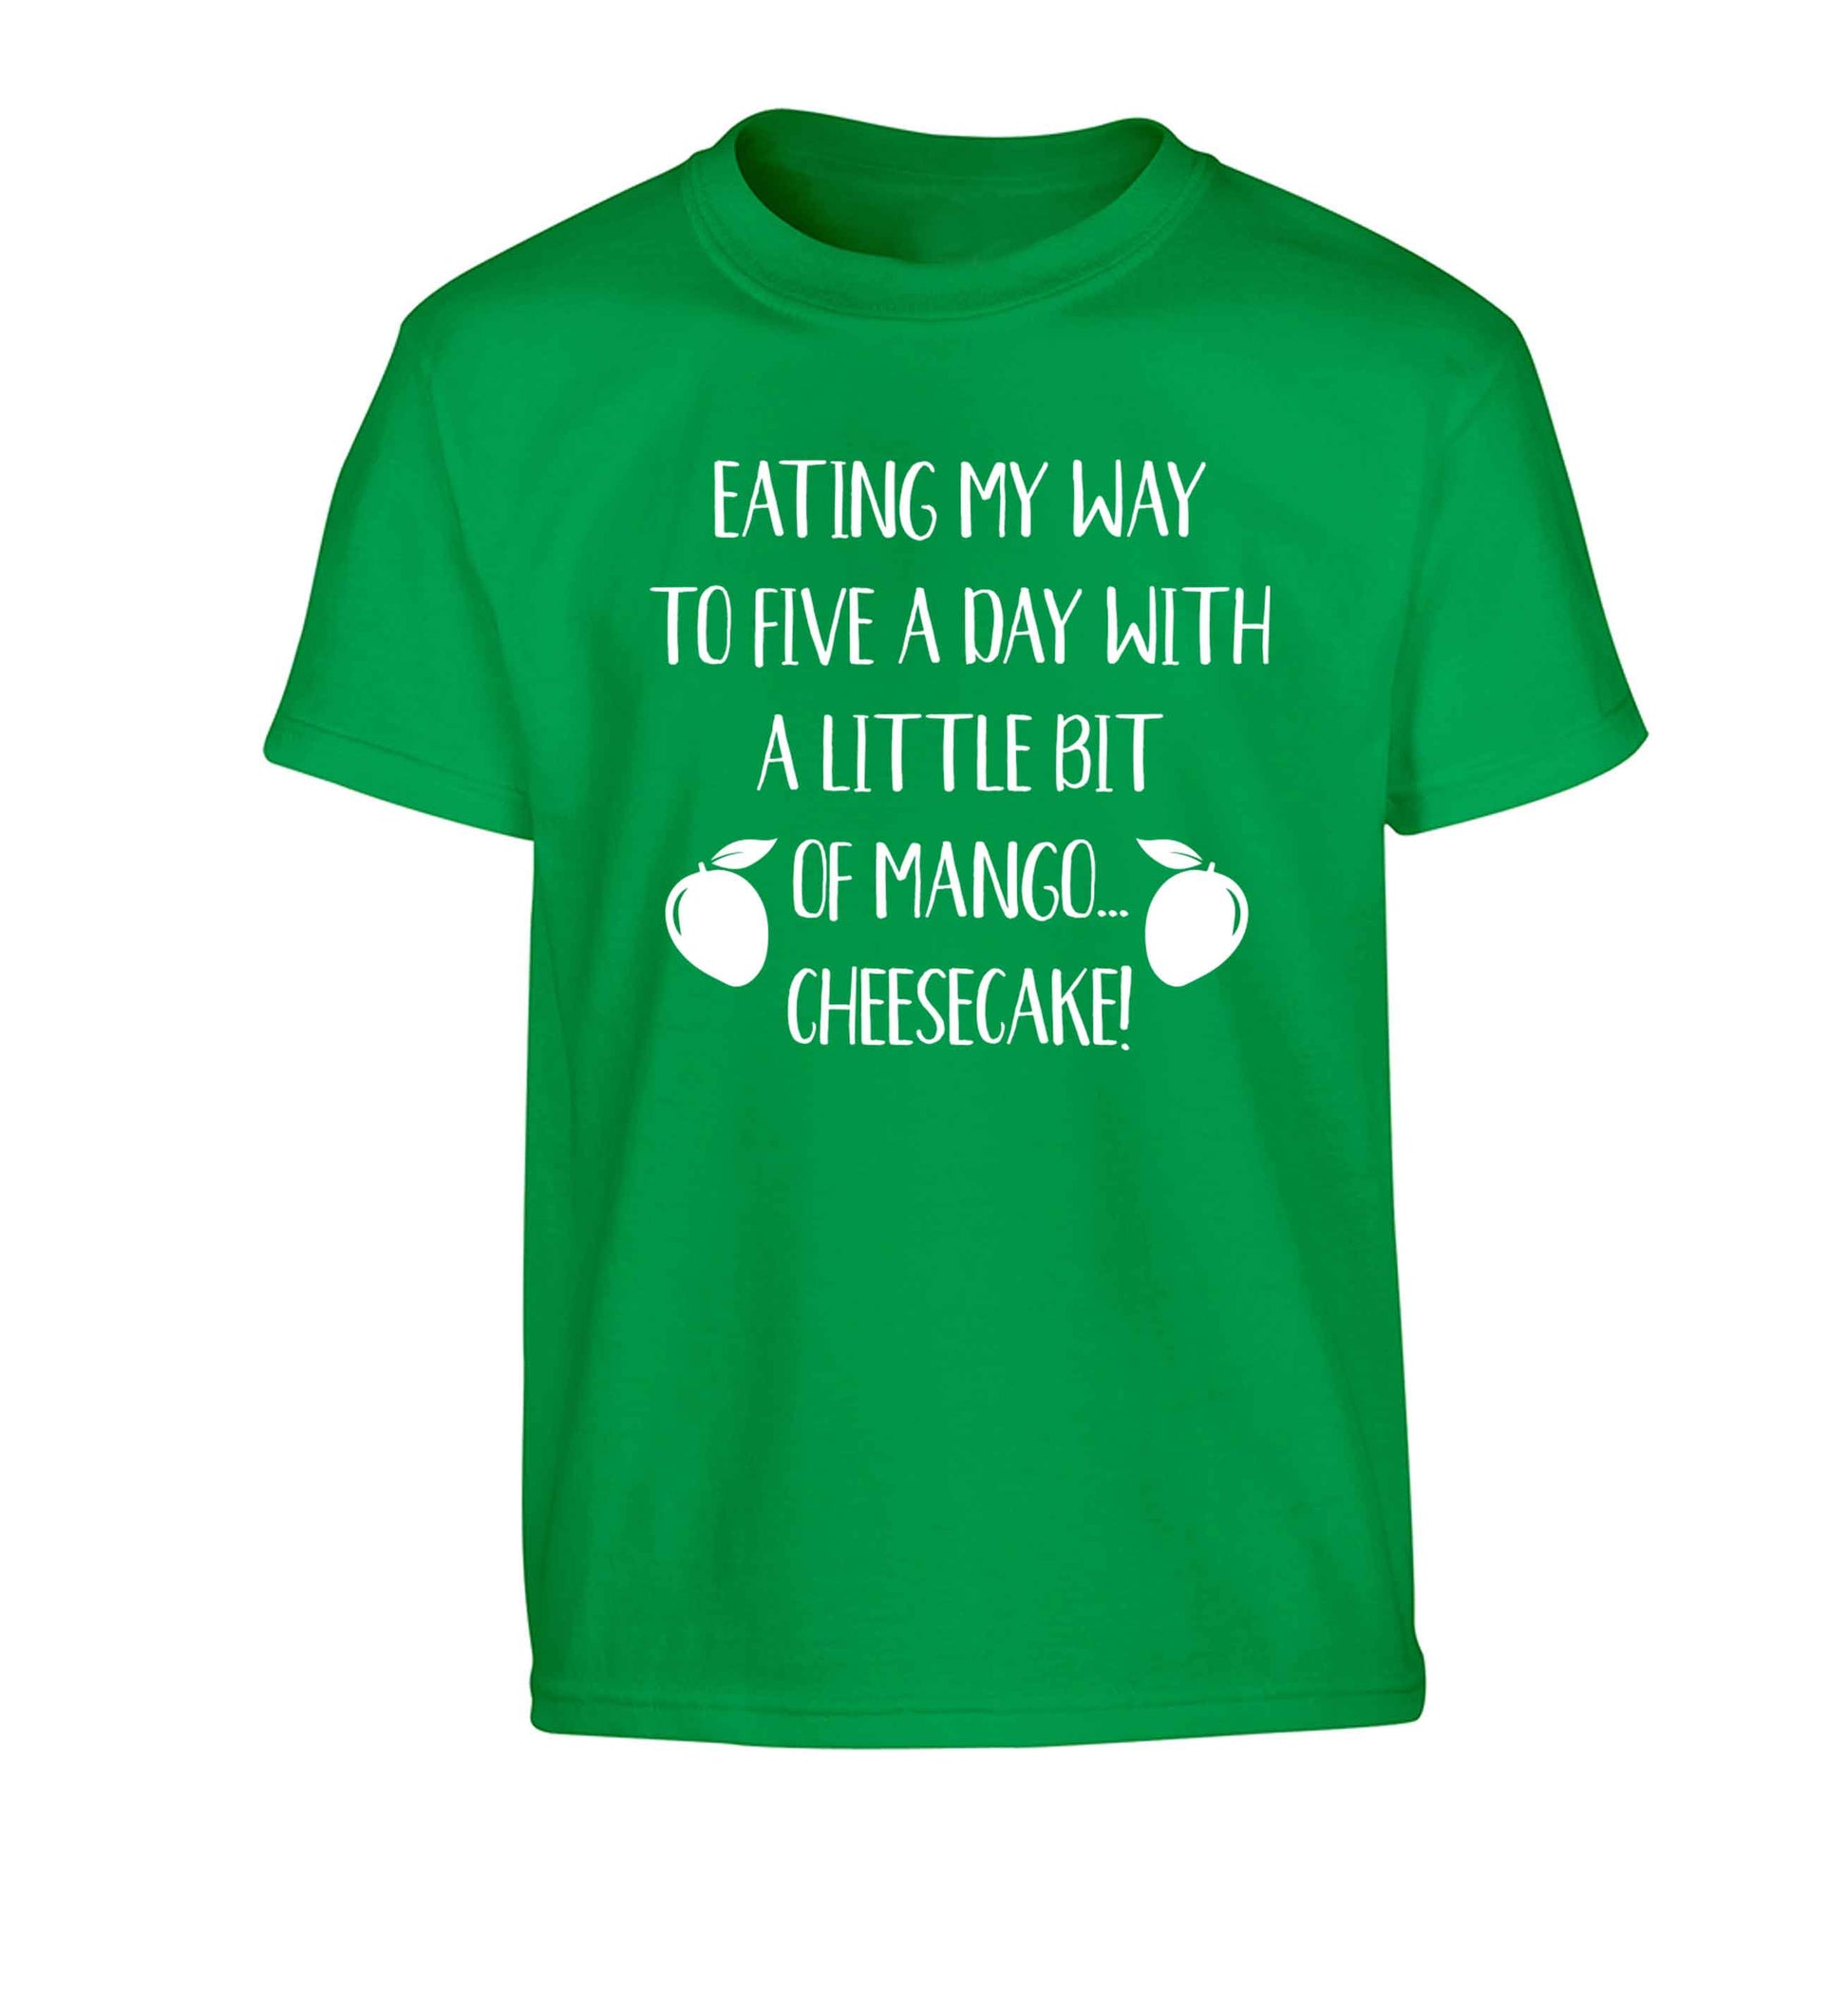 Eating my way to five a day with a little bit of mango cheesecake Children's green Tshirt 12-13 Years